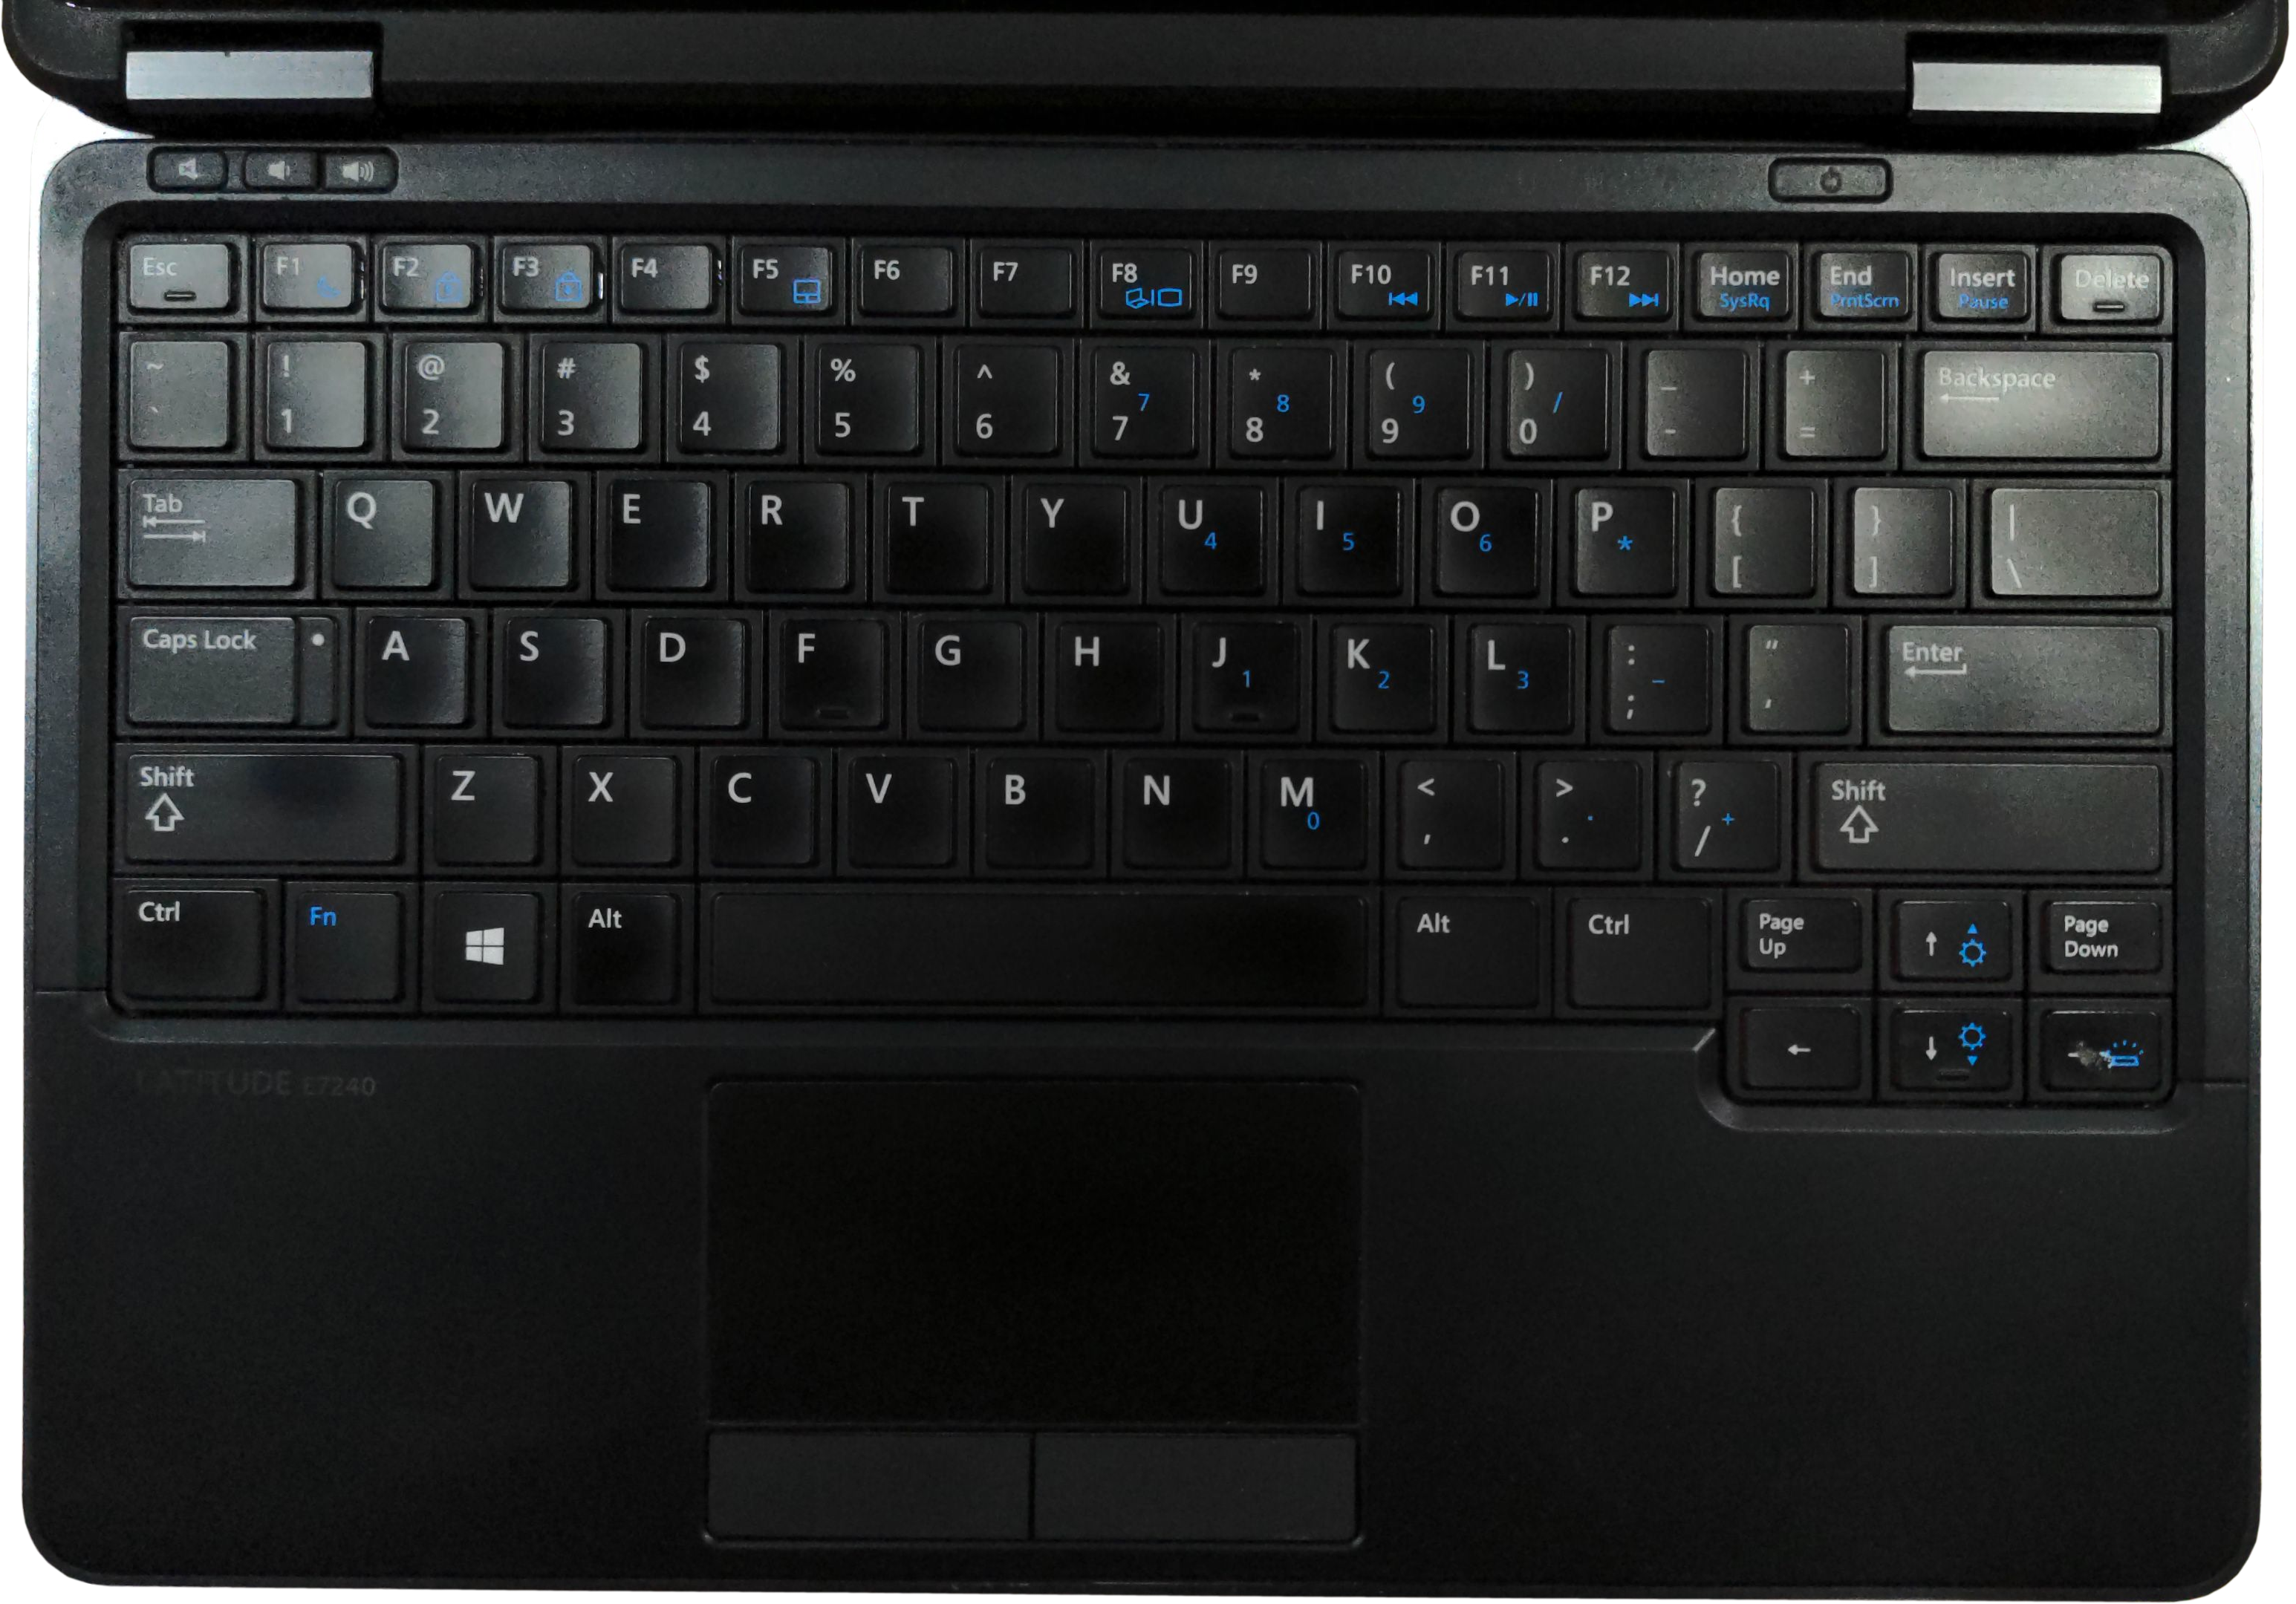 A view of the keyboard of this Dell Latitude